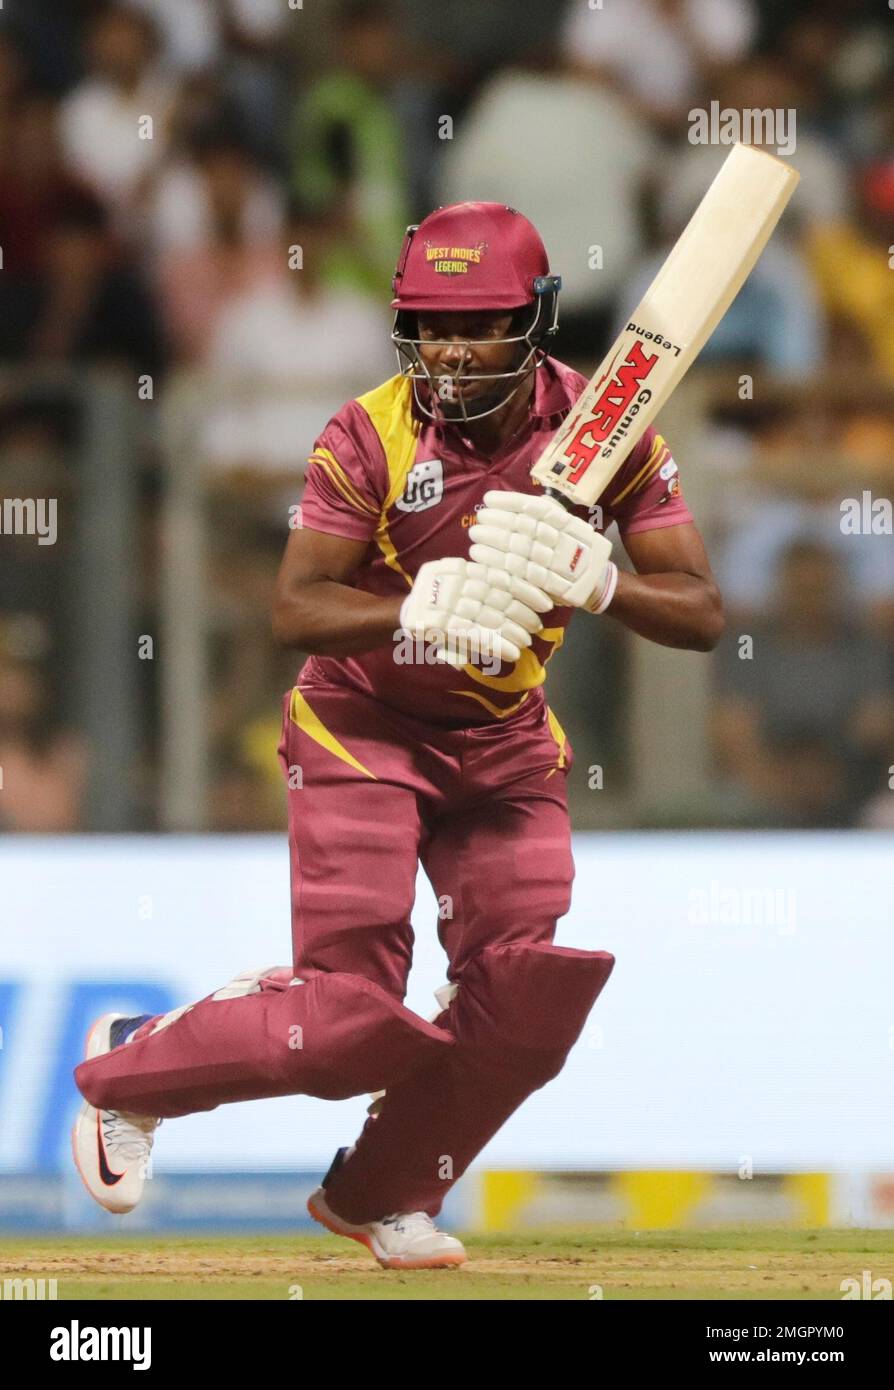 West Indies Legends Brian Lara bats during the Road Safety World Series cricket match against India Legends in Mumbai, India, Saturday, March 7, 2020